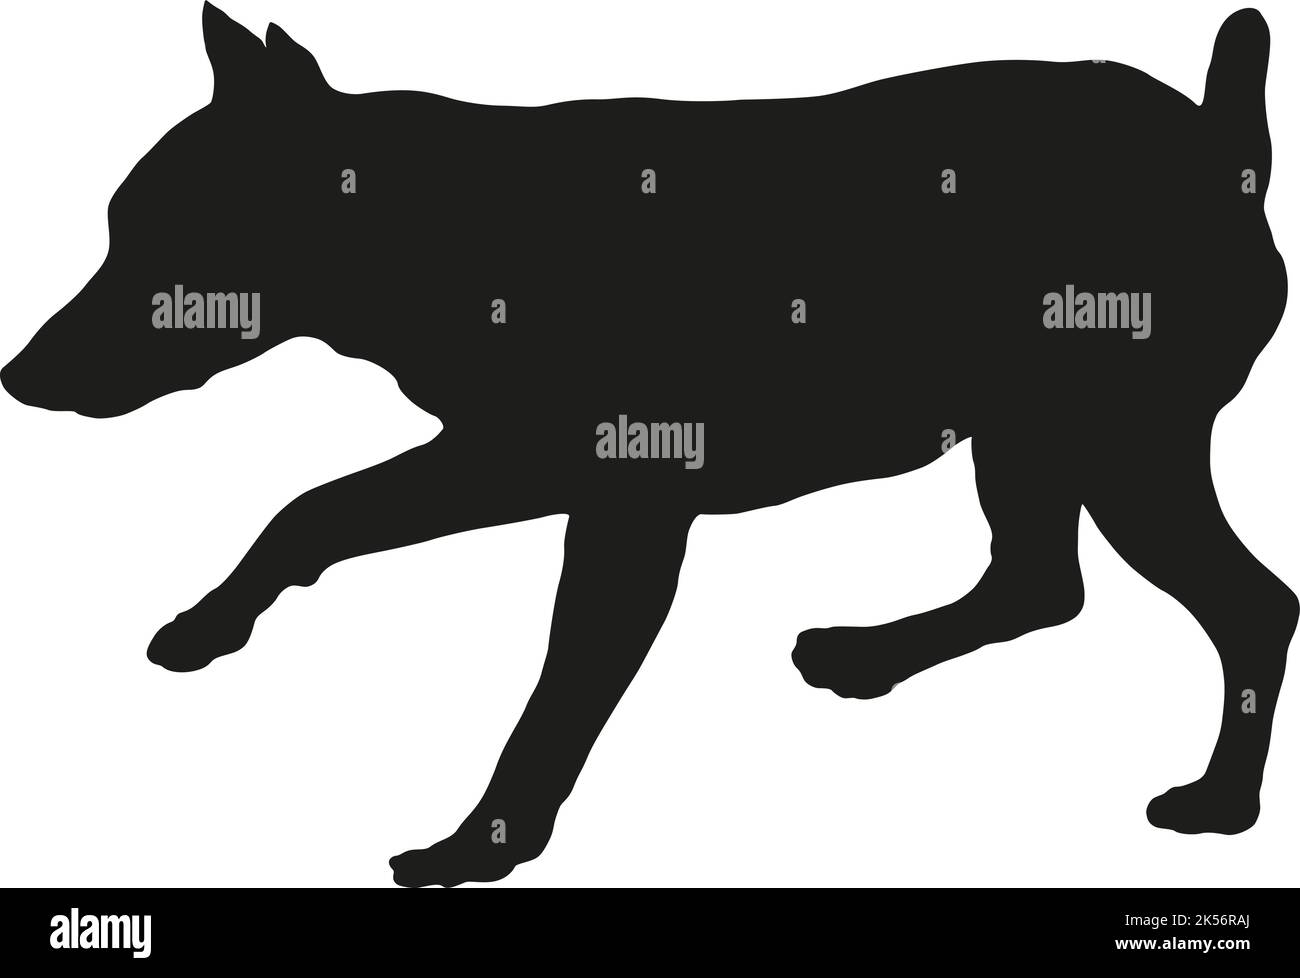 Black dog silhouette. Running zwergpinscher puppy. Miniature pinscher or king of the toys. Pet animals. Isolated on a white background. Illustration. Stock Vector